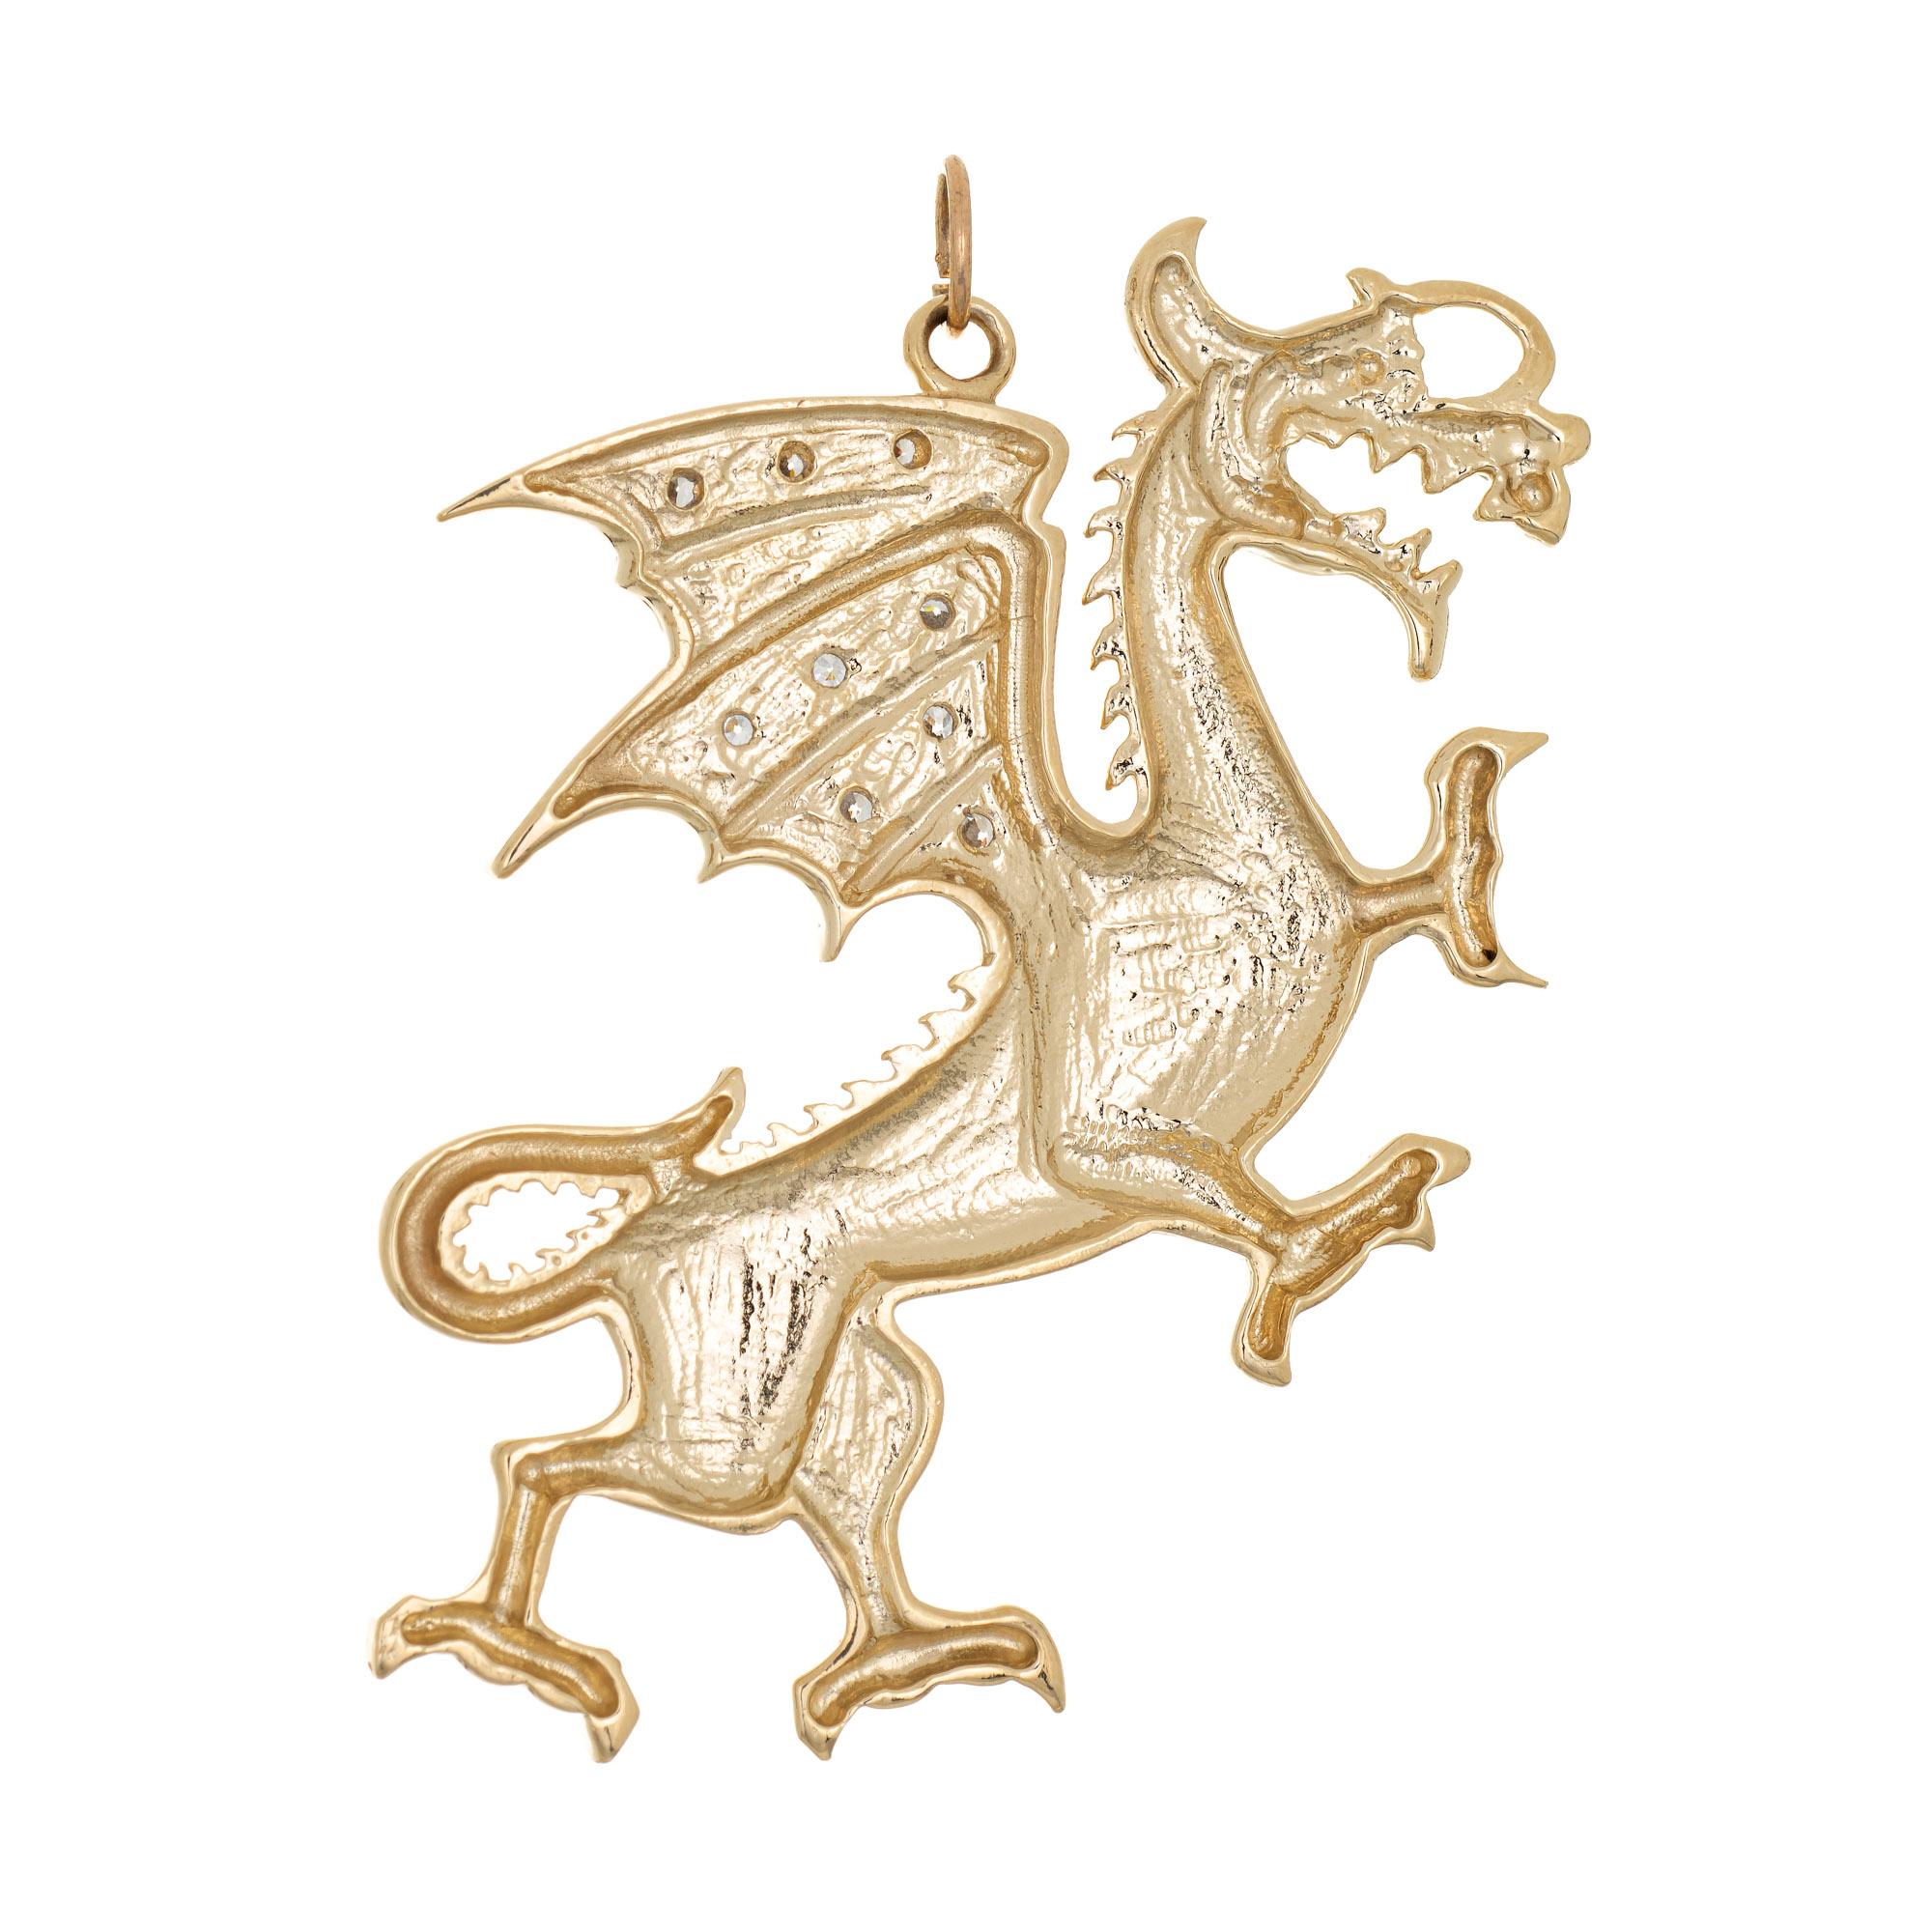 Finely detailed vintage winged dragon pendant crafted in 10 karat yellow gold (circa 1970s)

Diamonds total an estimated 0.05 carats (estimated at H-I color and SI1-2 clarity). 

The elaborate pendant highlights a diamond set winged dragon. Legend